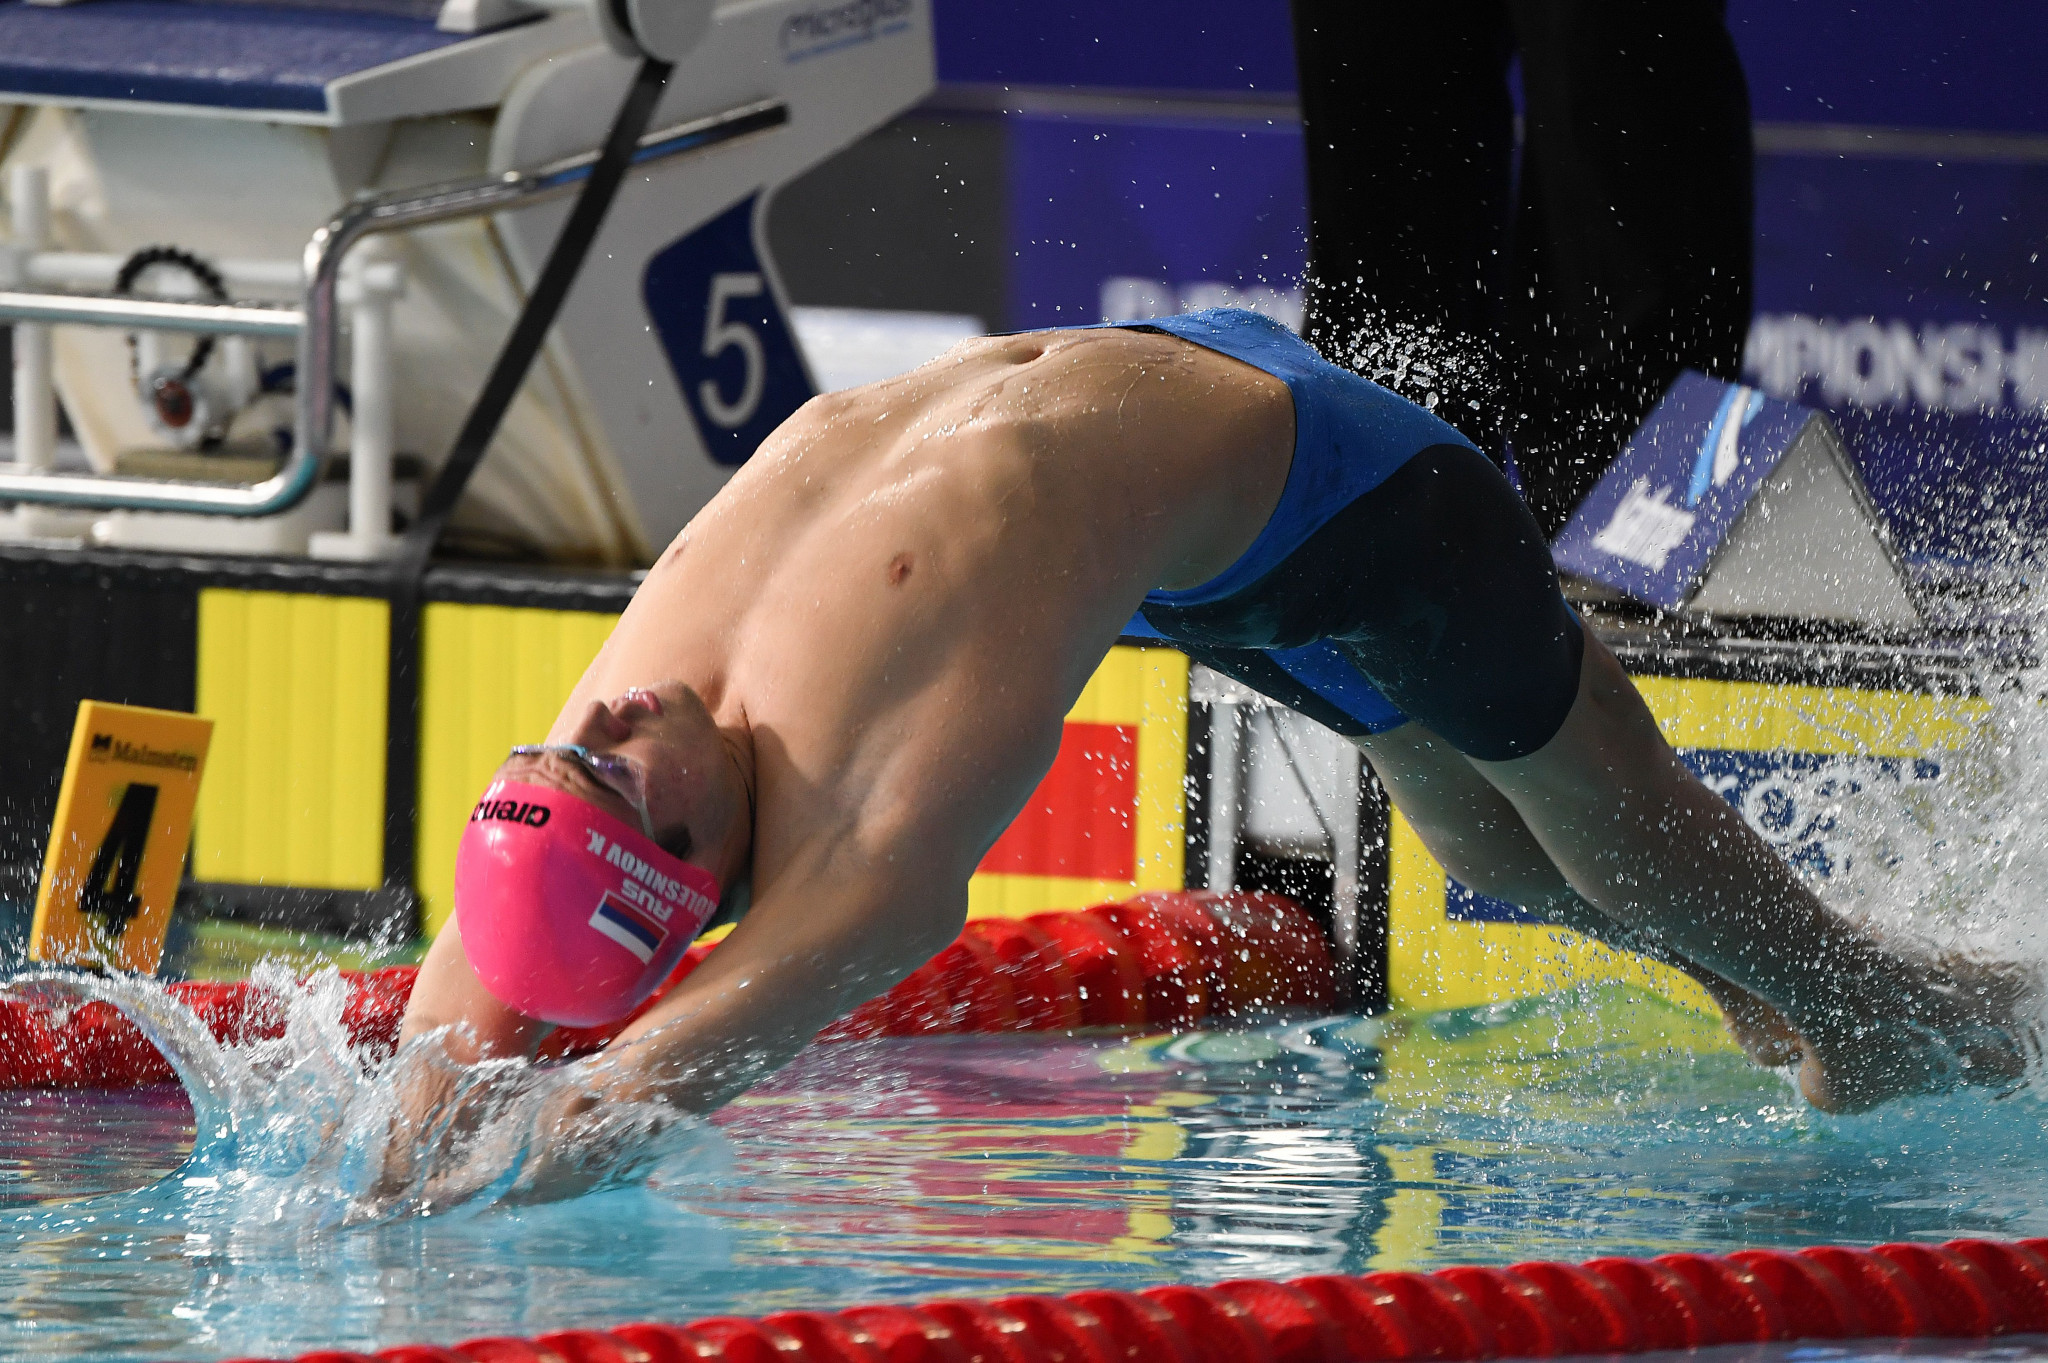 Russia's Kliment Kolesnikov continued his fine form with a world junior record-breaking win in the men's 100m backstroke final ©Getty Images